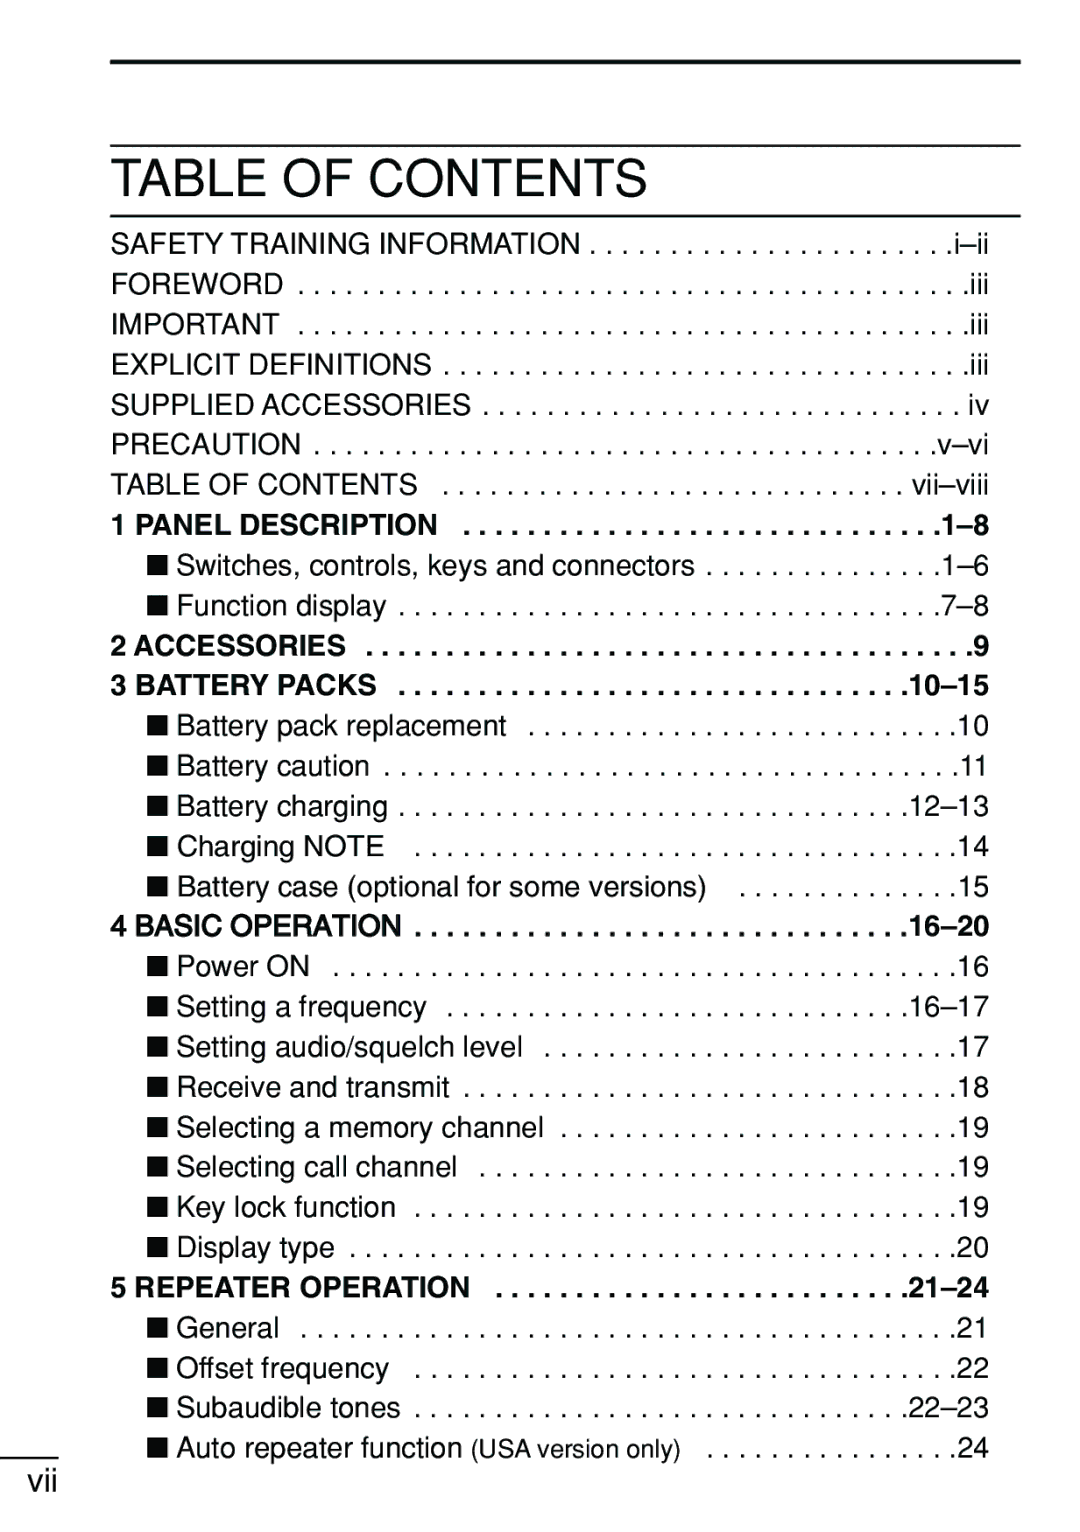 Icom IC-V8 instruction manual Table of Contents 